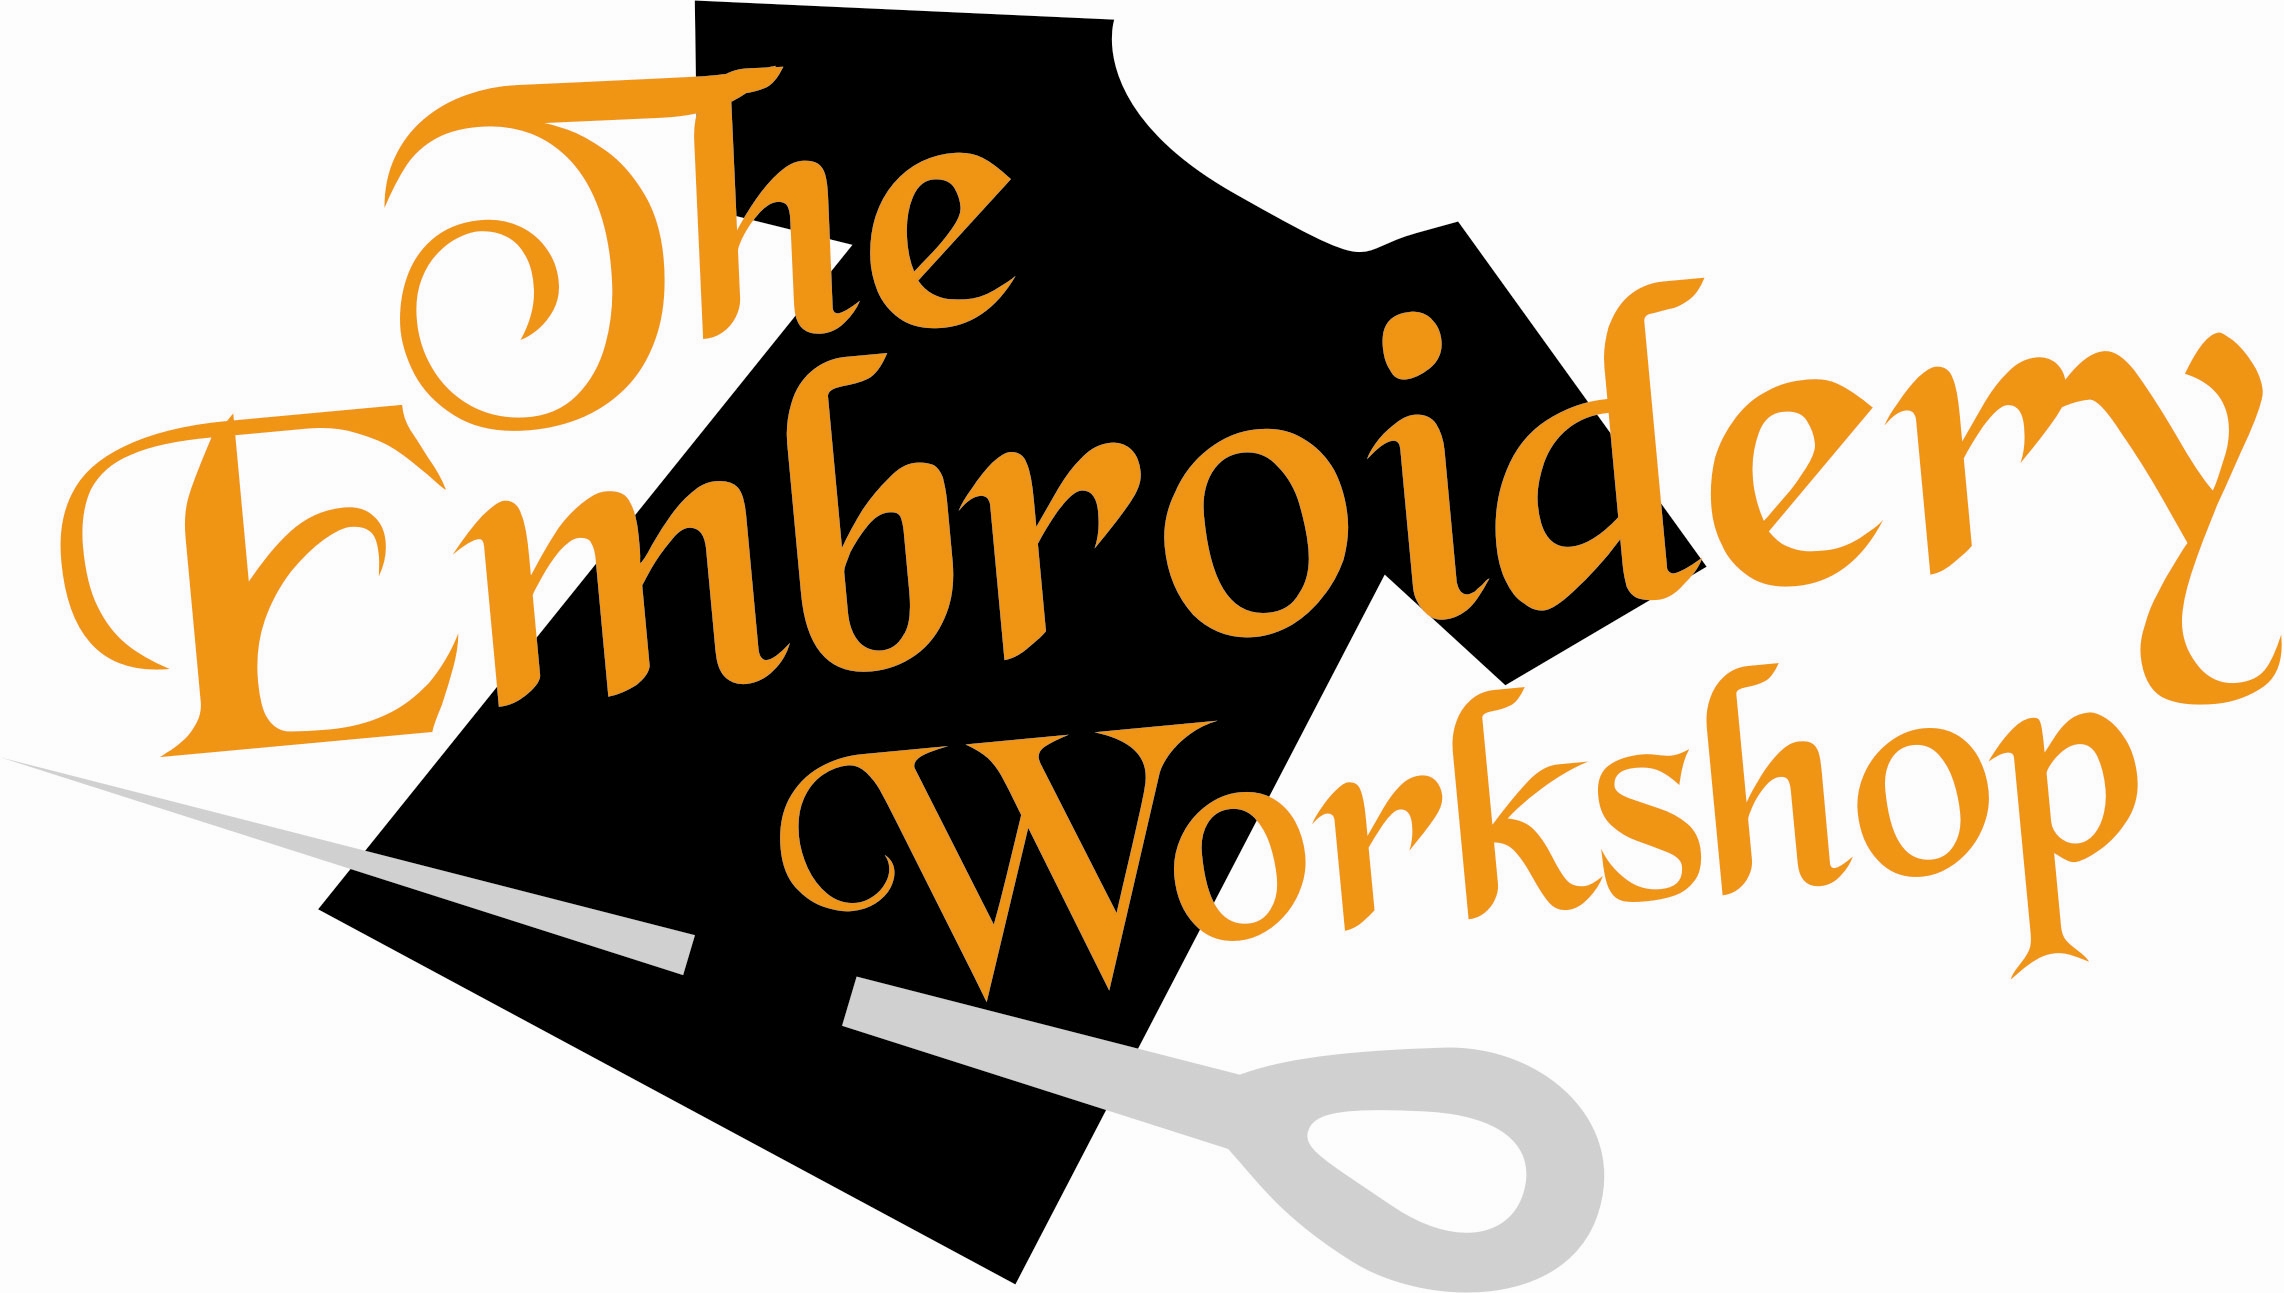 The Embroidery Workshop